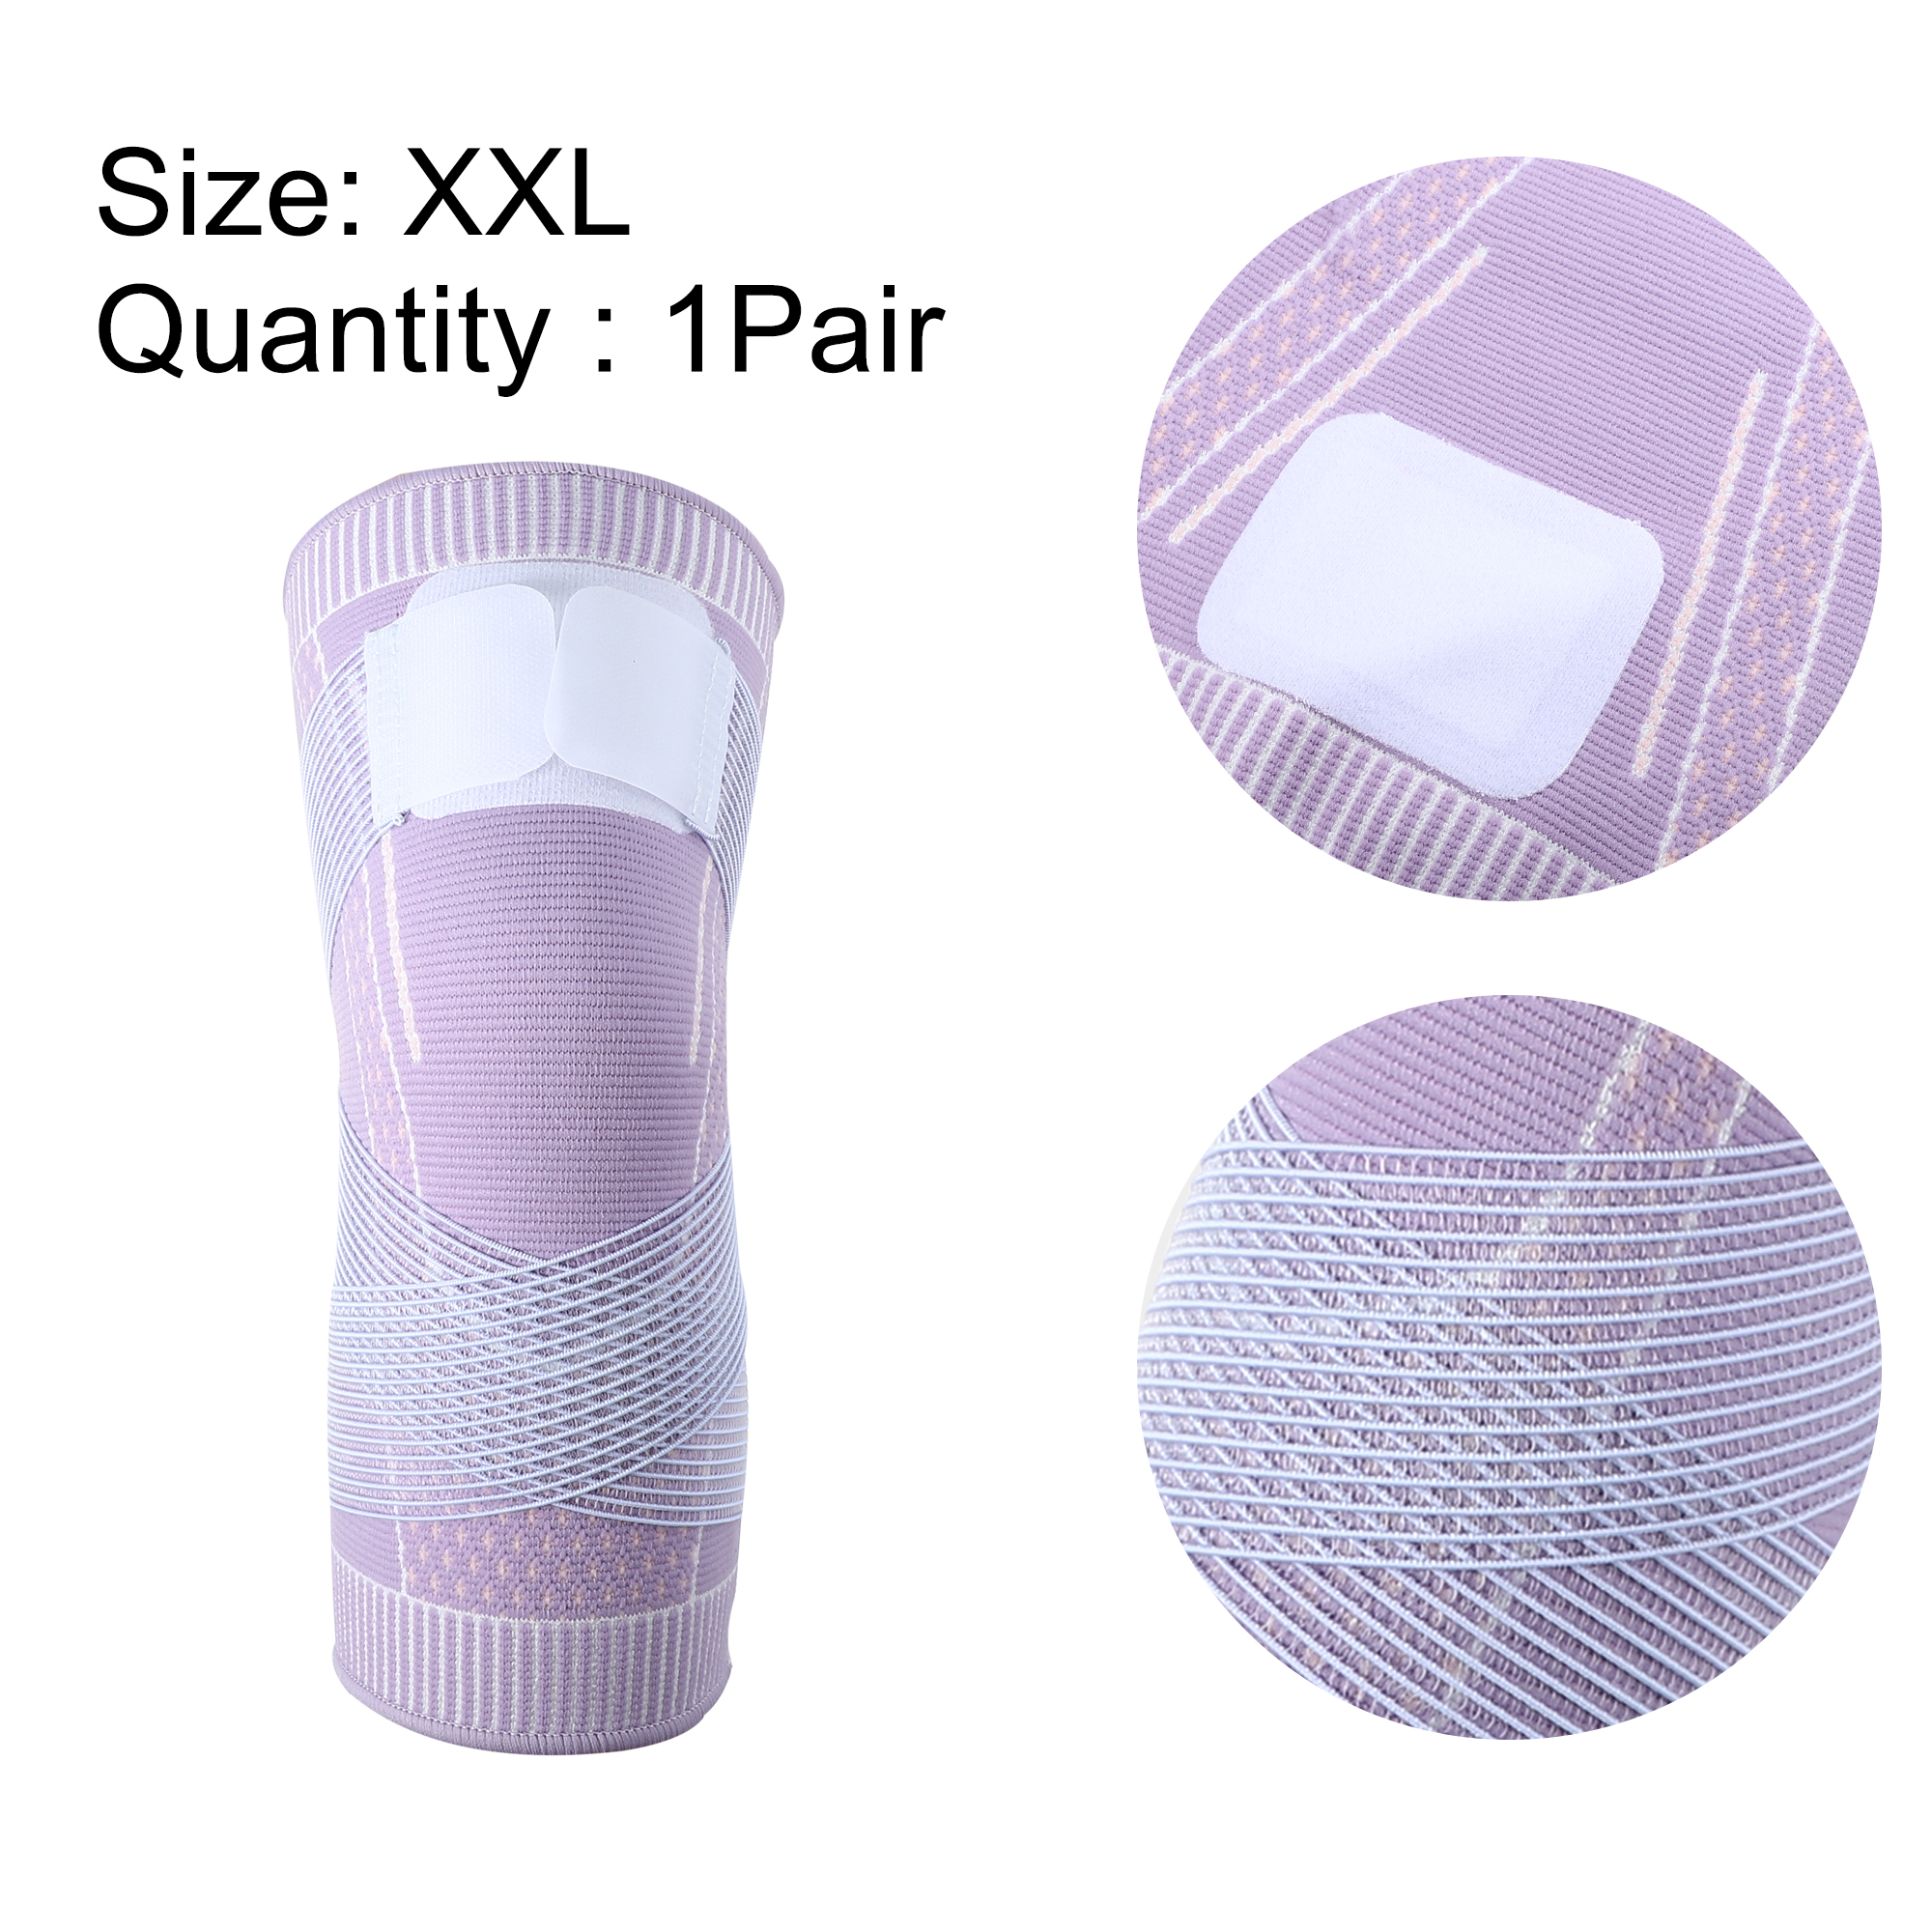 Unique Bargains 1 Pair Knee Protection Brace Tightening Breathable for Sports Purple XXL Size